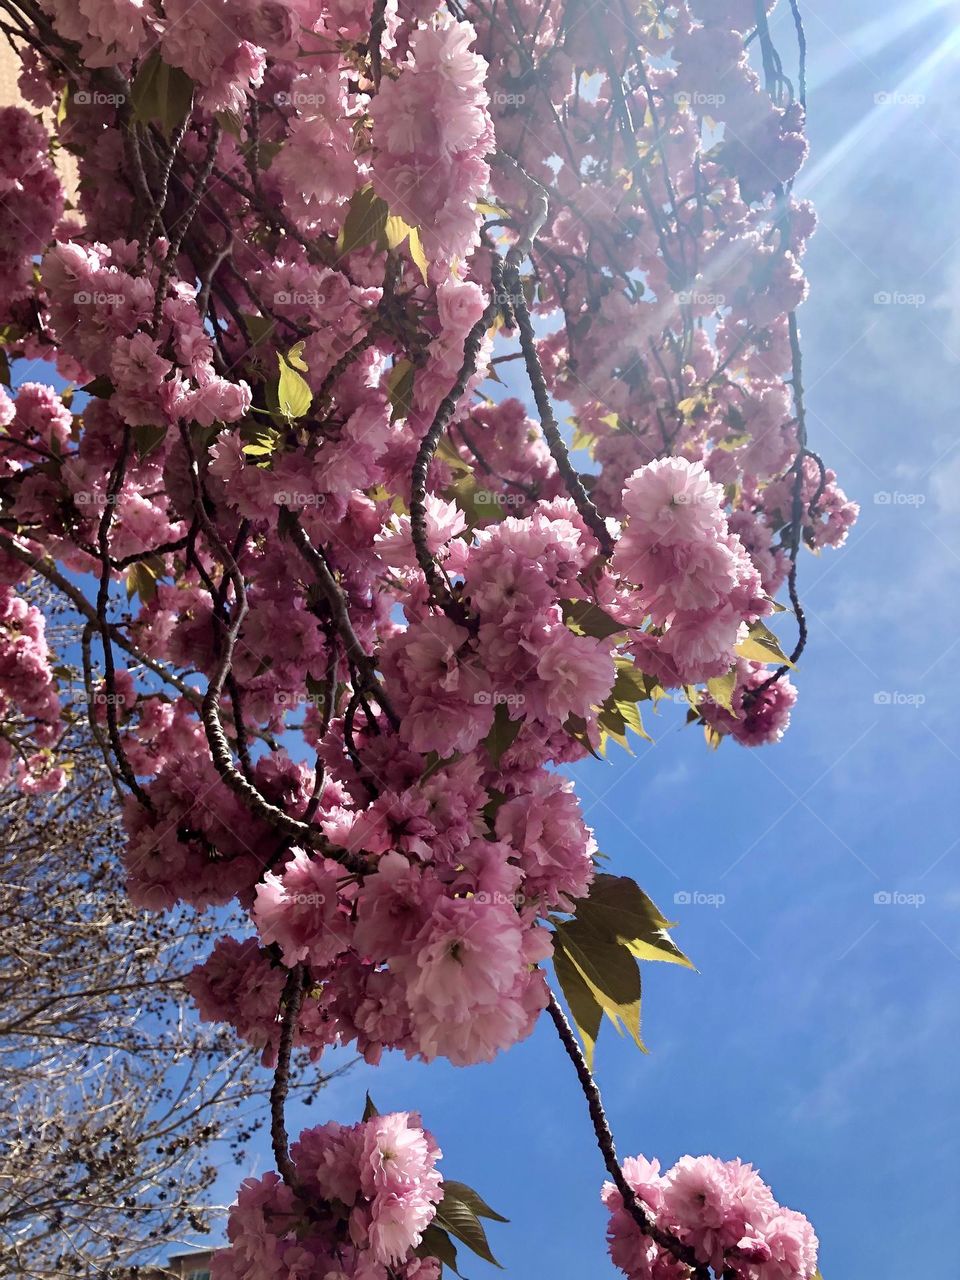 The wonderful cherry blossoms in Alexandria 